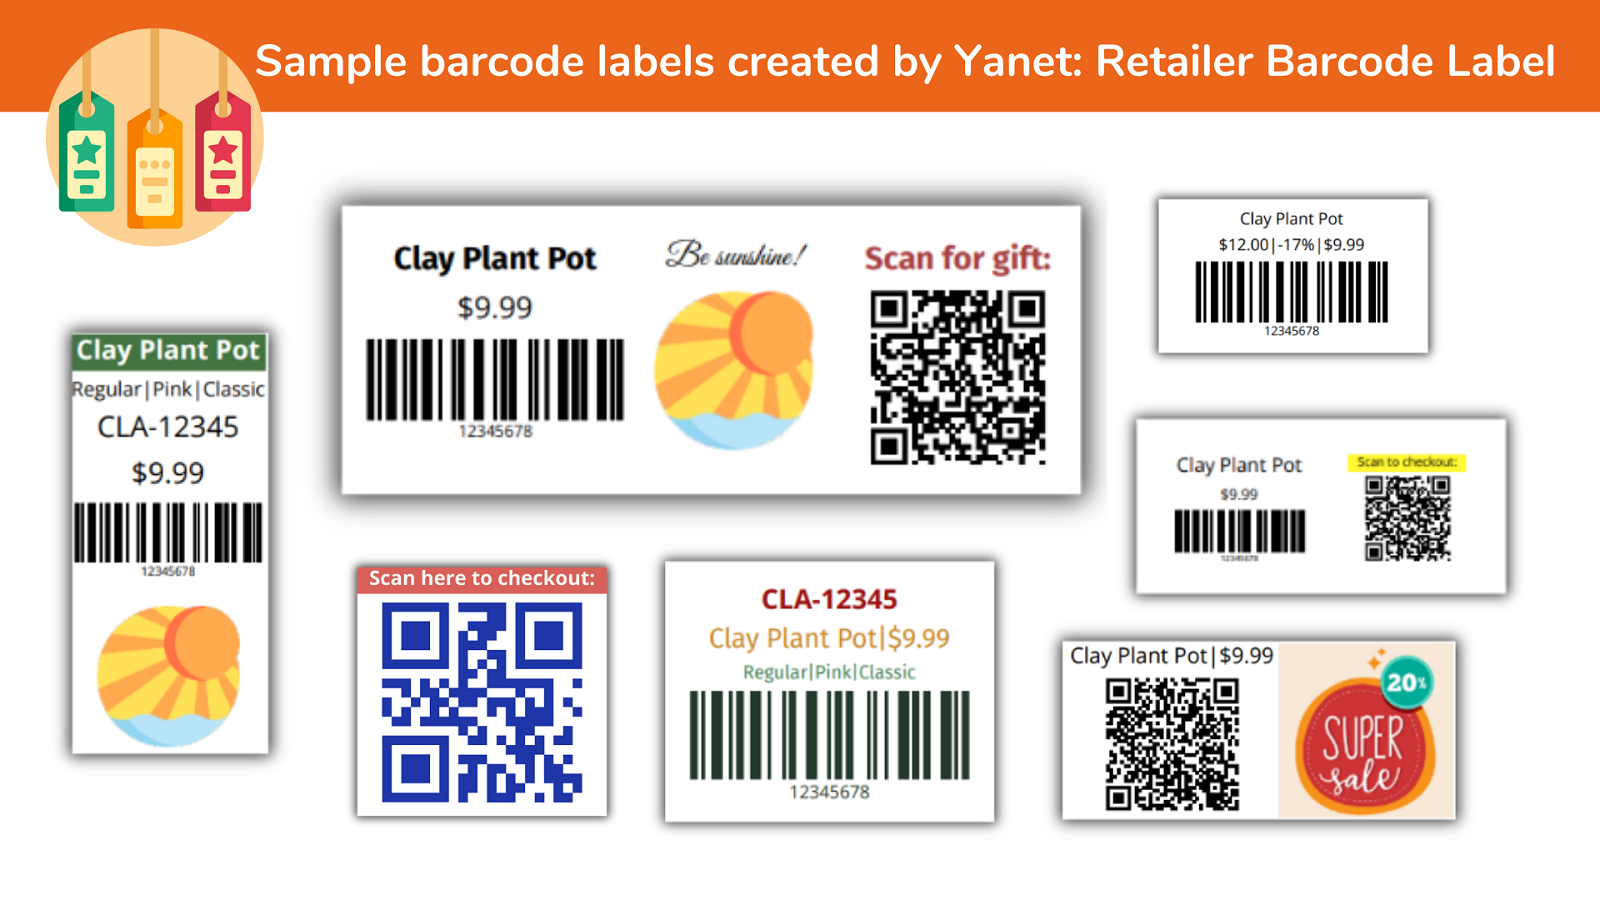 Sample barcode labels created by Yanet Retailer Barcode Label